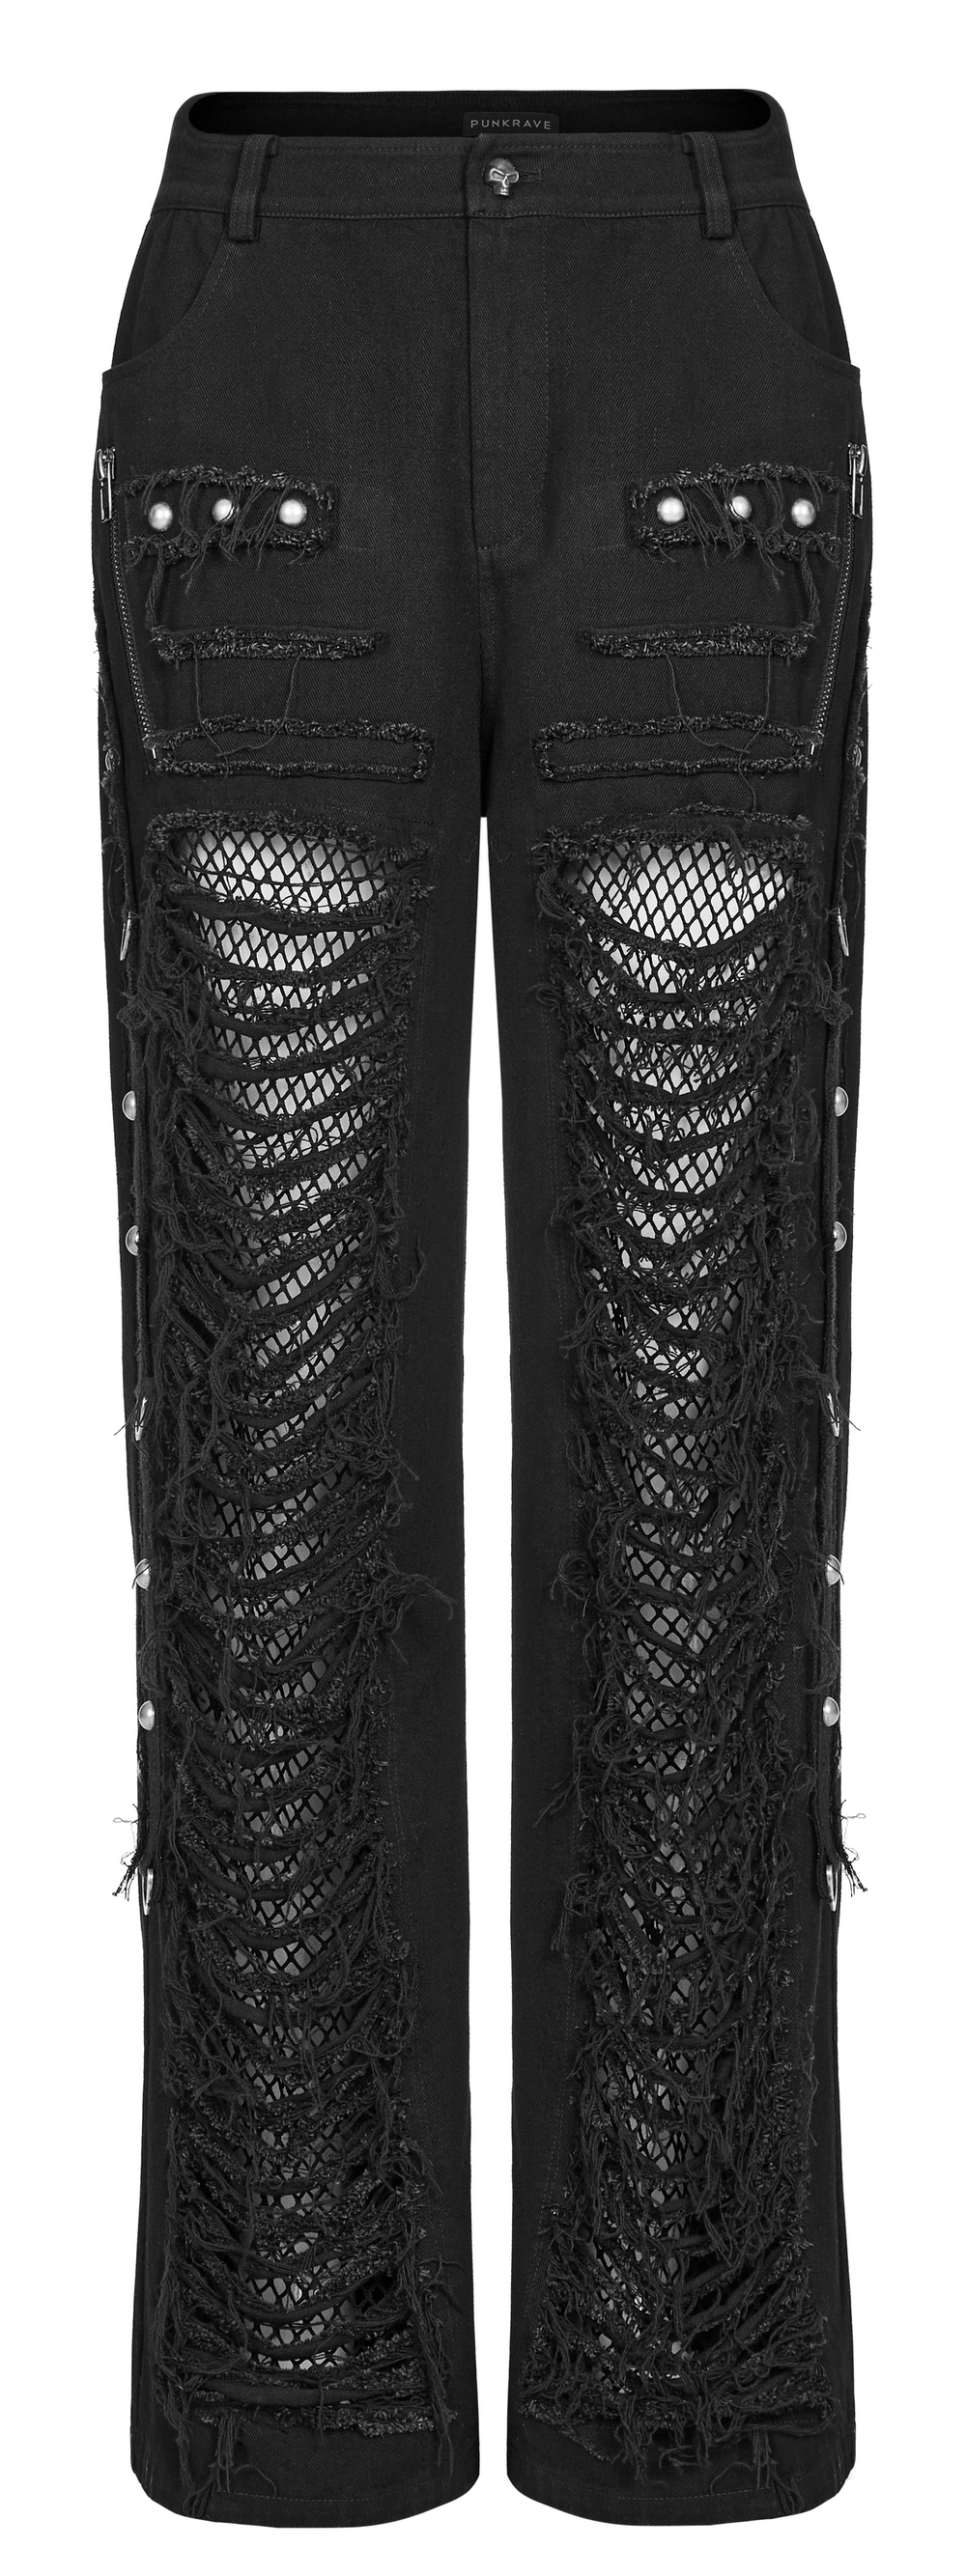 Black Gothic Lace-Up Chain Cargo Pants for Men - HARD'N'HEAVY